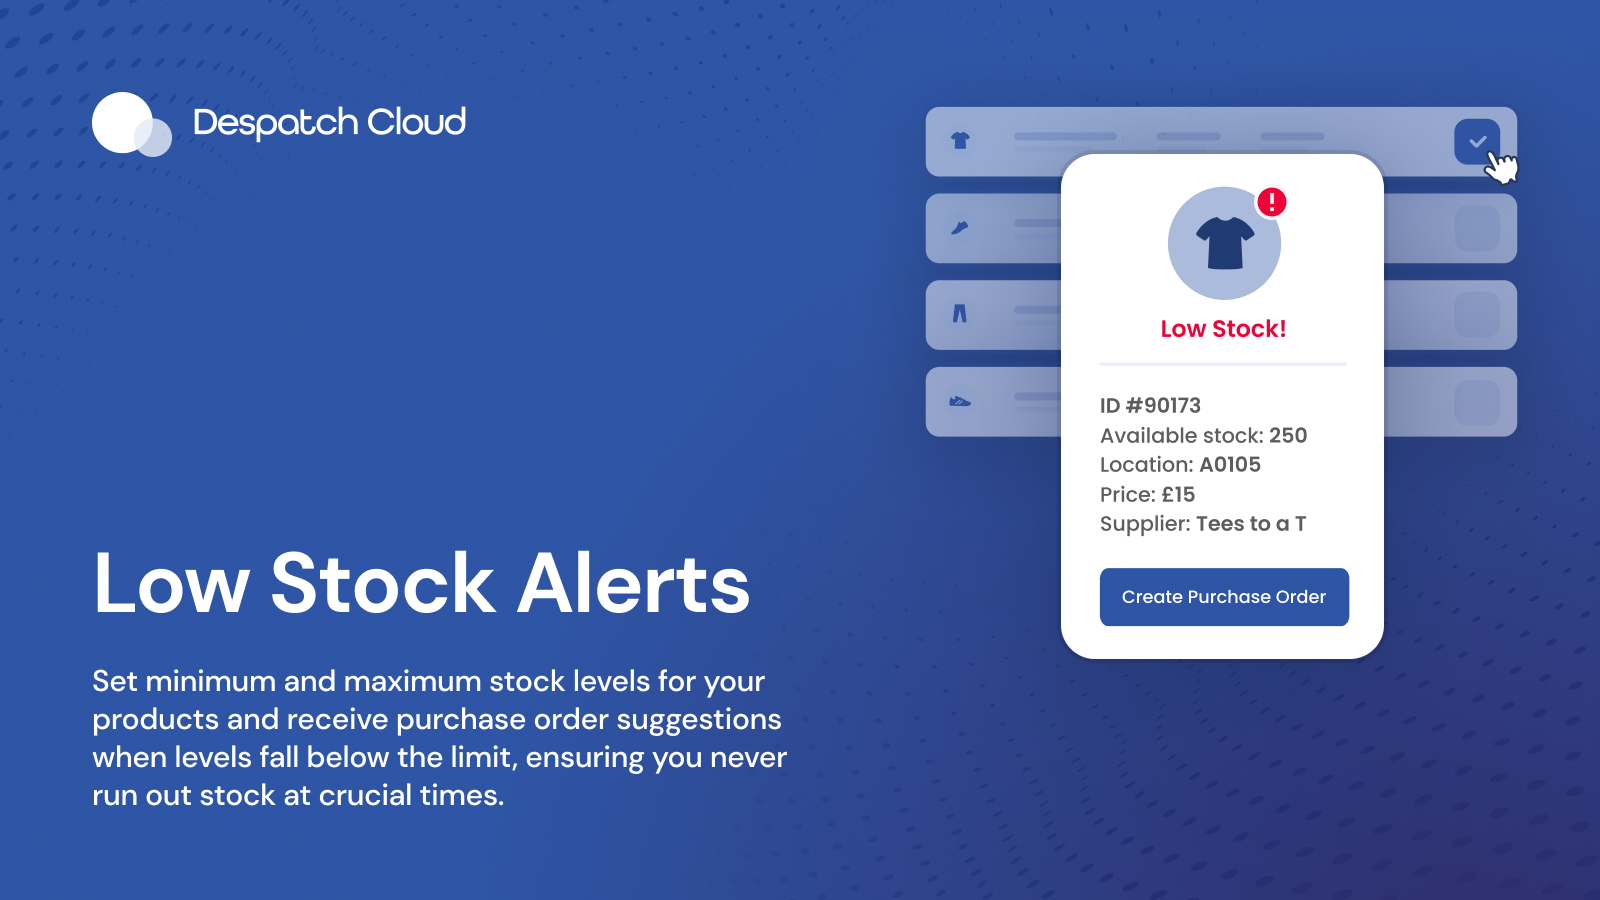 Set minimum and maximum stock levels for your products and receive purchase order suggestions when levels fall below the limit, ensuring you never run out stock at crucial times.